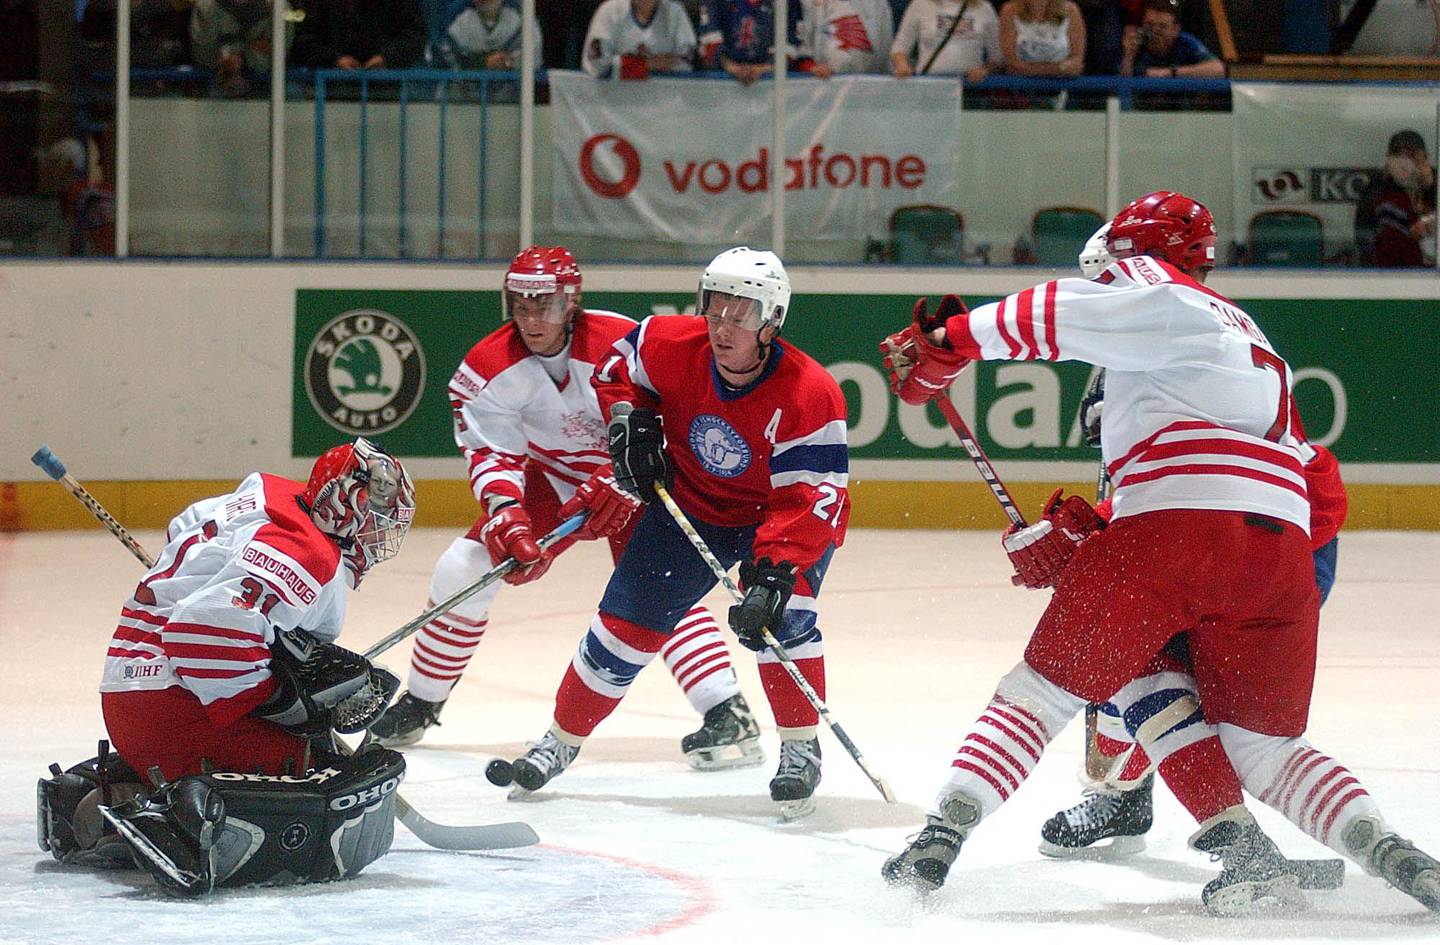 
Trond Magnussen of Norway, in red jersey, center, in action in front of Denmark's goalie Peter Hirch, left, during their match in the fourth round of the Ice Hockey Division I, Group B World Championships in Szekesfehervar, southwest of Budapest, Hungary, on Friday, April 19, 2002. (AP Photo/MTI/Imre Foeldi)